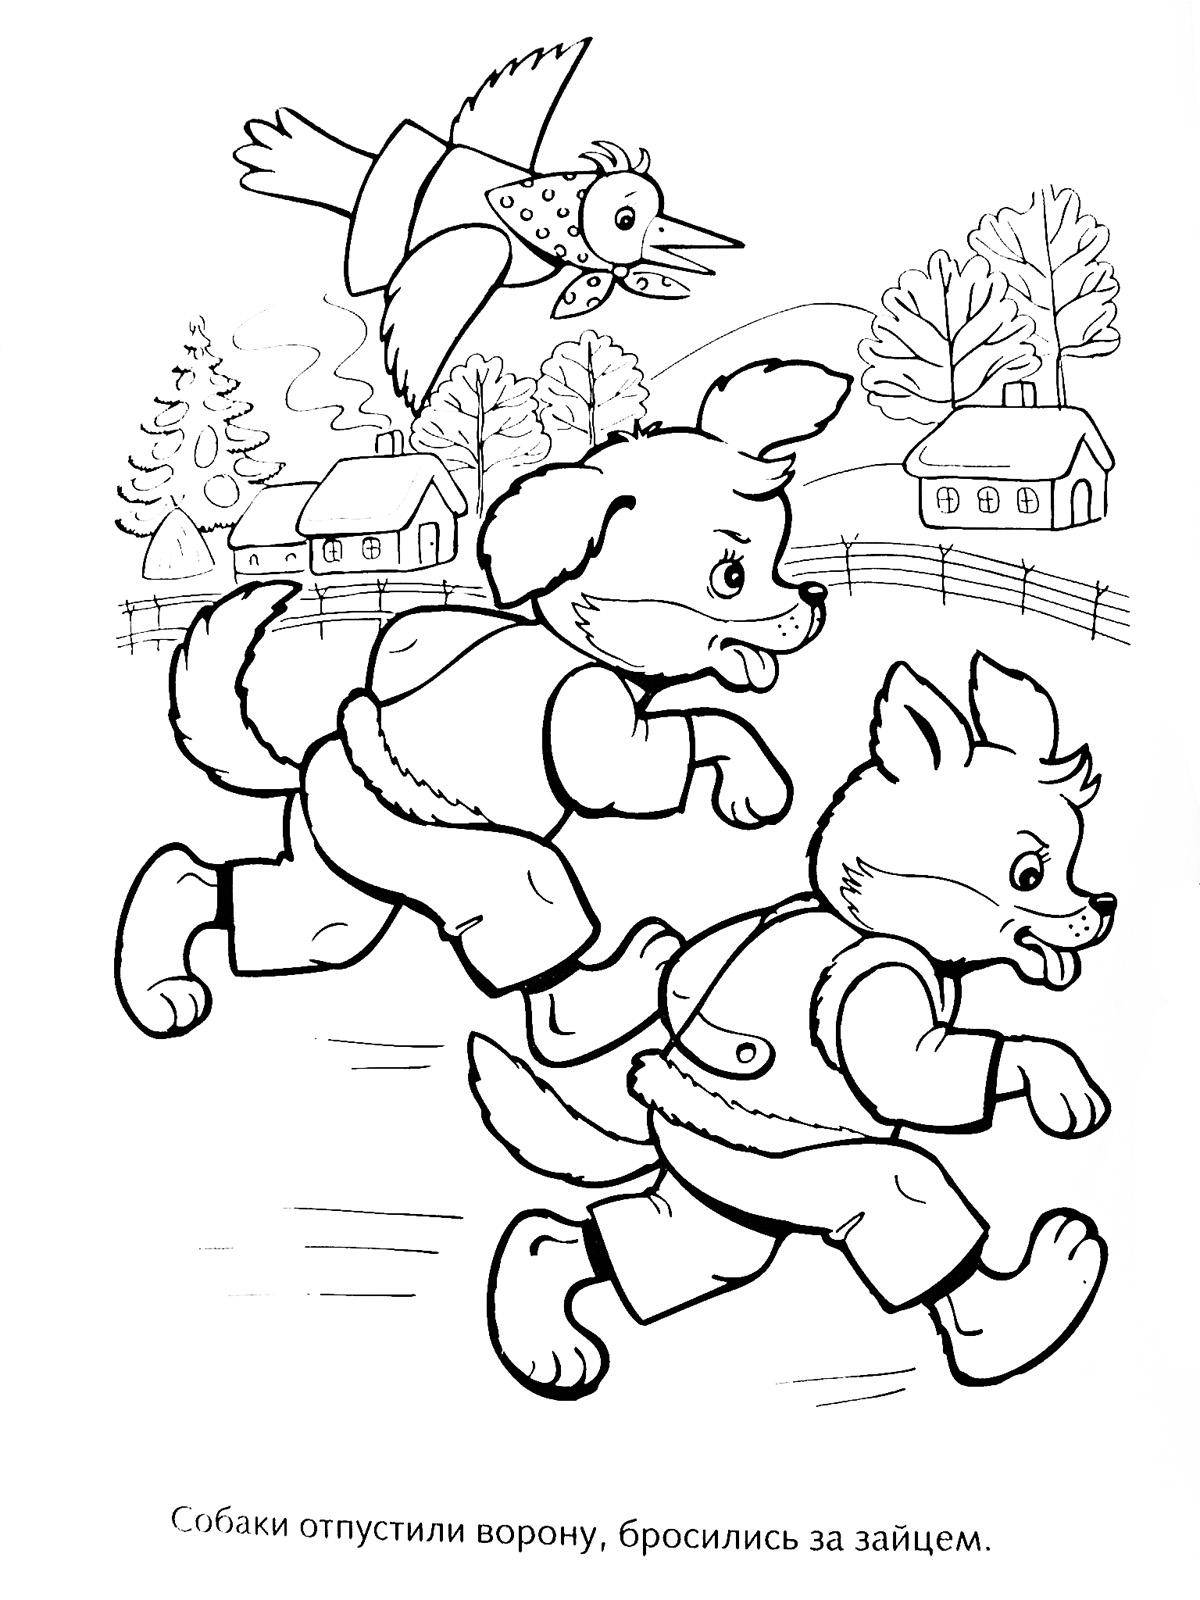 Coloring Figure fleeing dogs. Category Pets allowed. Tags:  hare, rabbit.